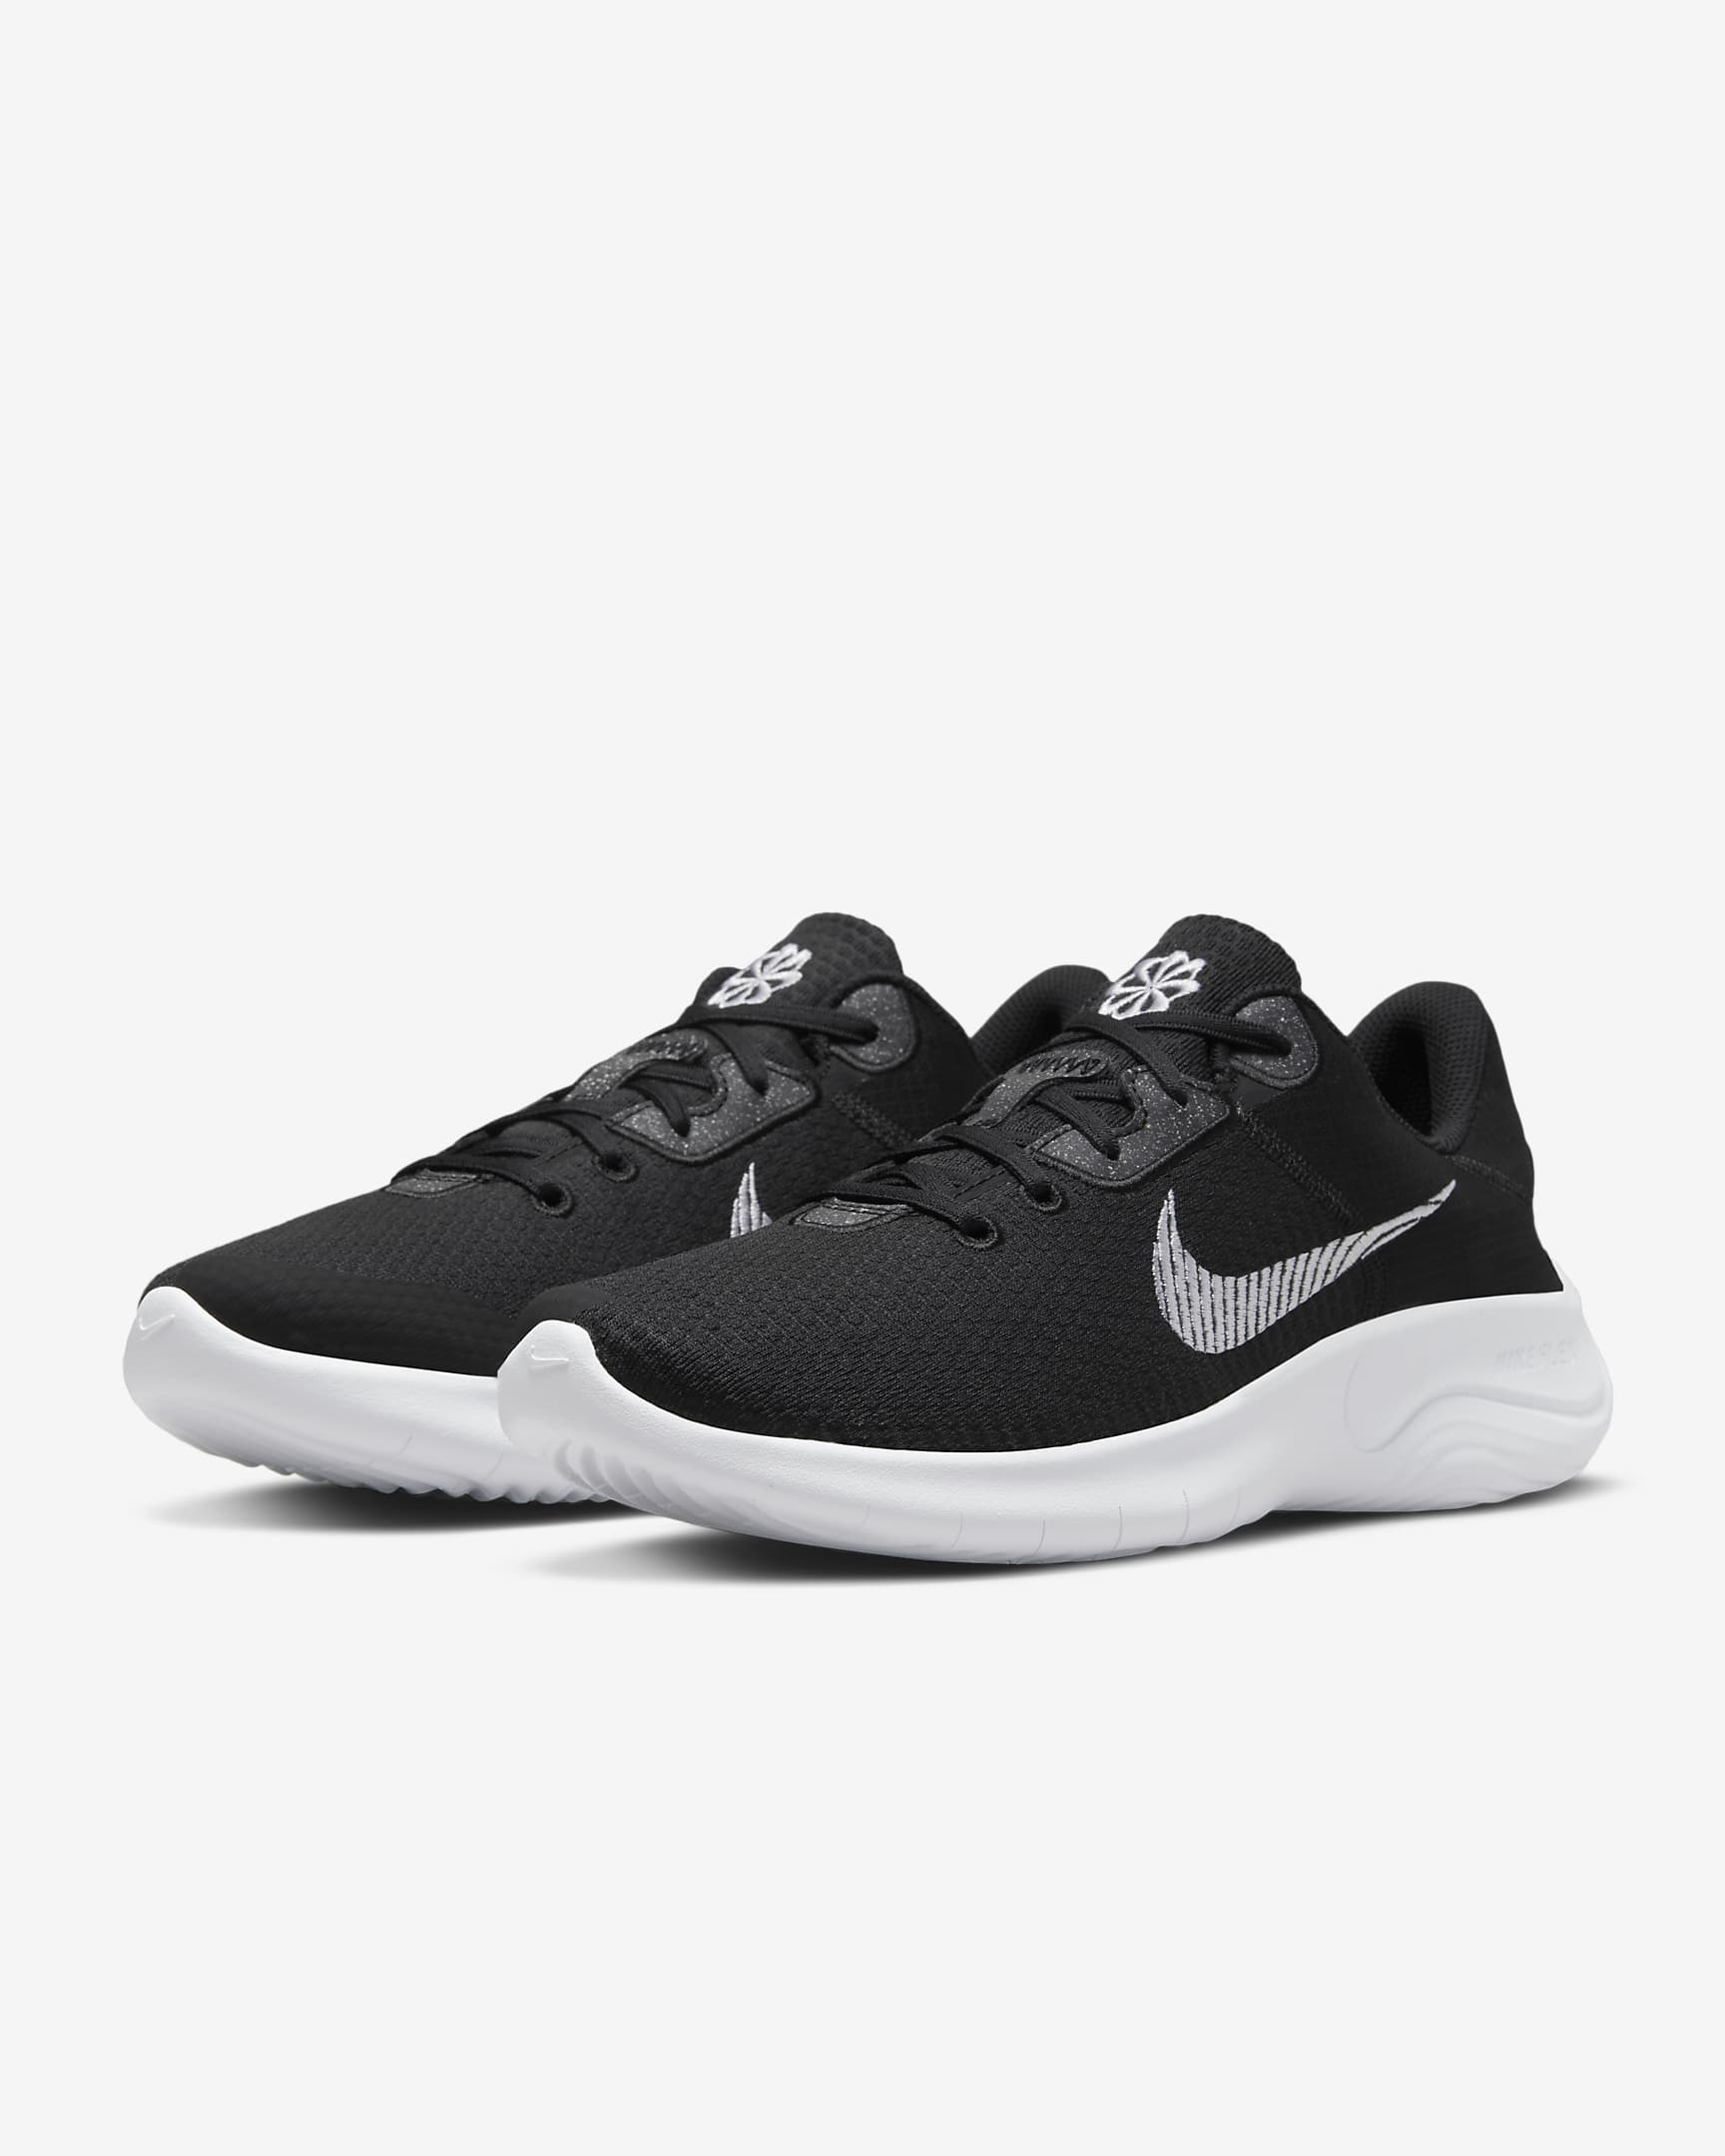 Men's, Women's & Kid's Clearance Shoes: Extra 30% Off: Men's Nike Flex Experience 11 (Black) $25.15, adidas RunFalcon 3.0 (Lucid Fuchsia) $14.65 & More + FS on $25+